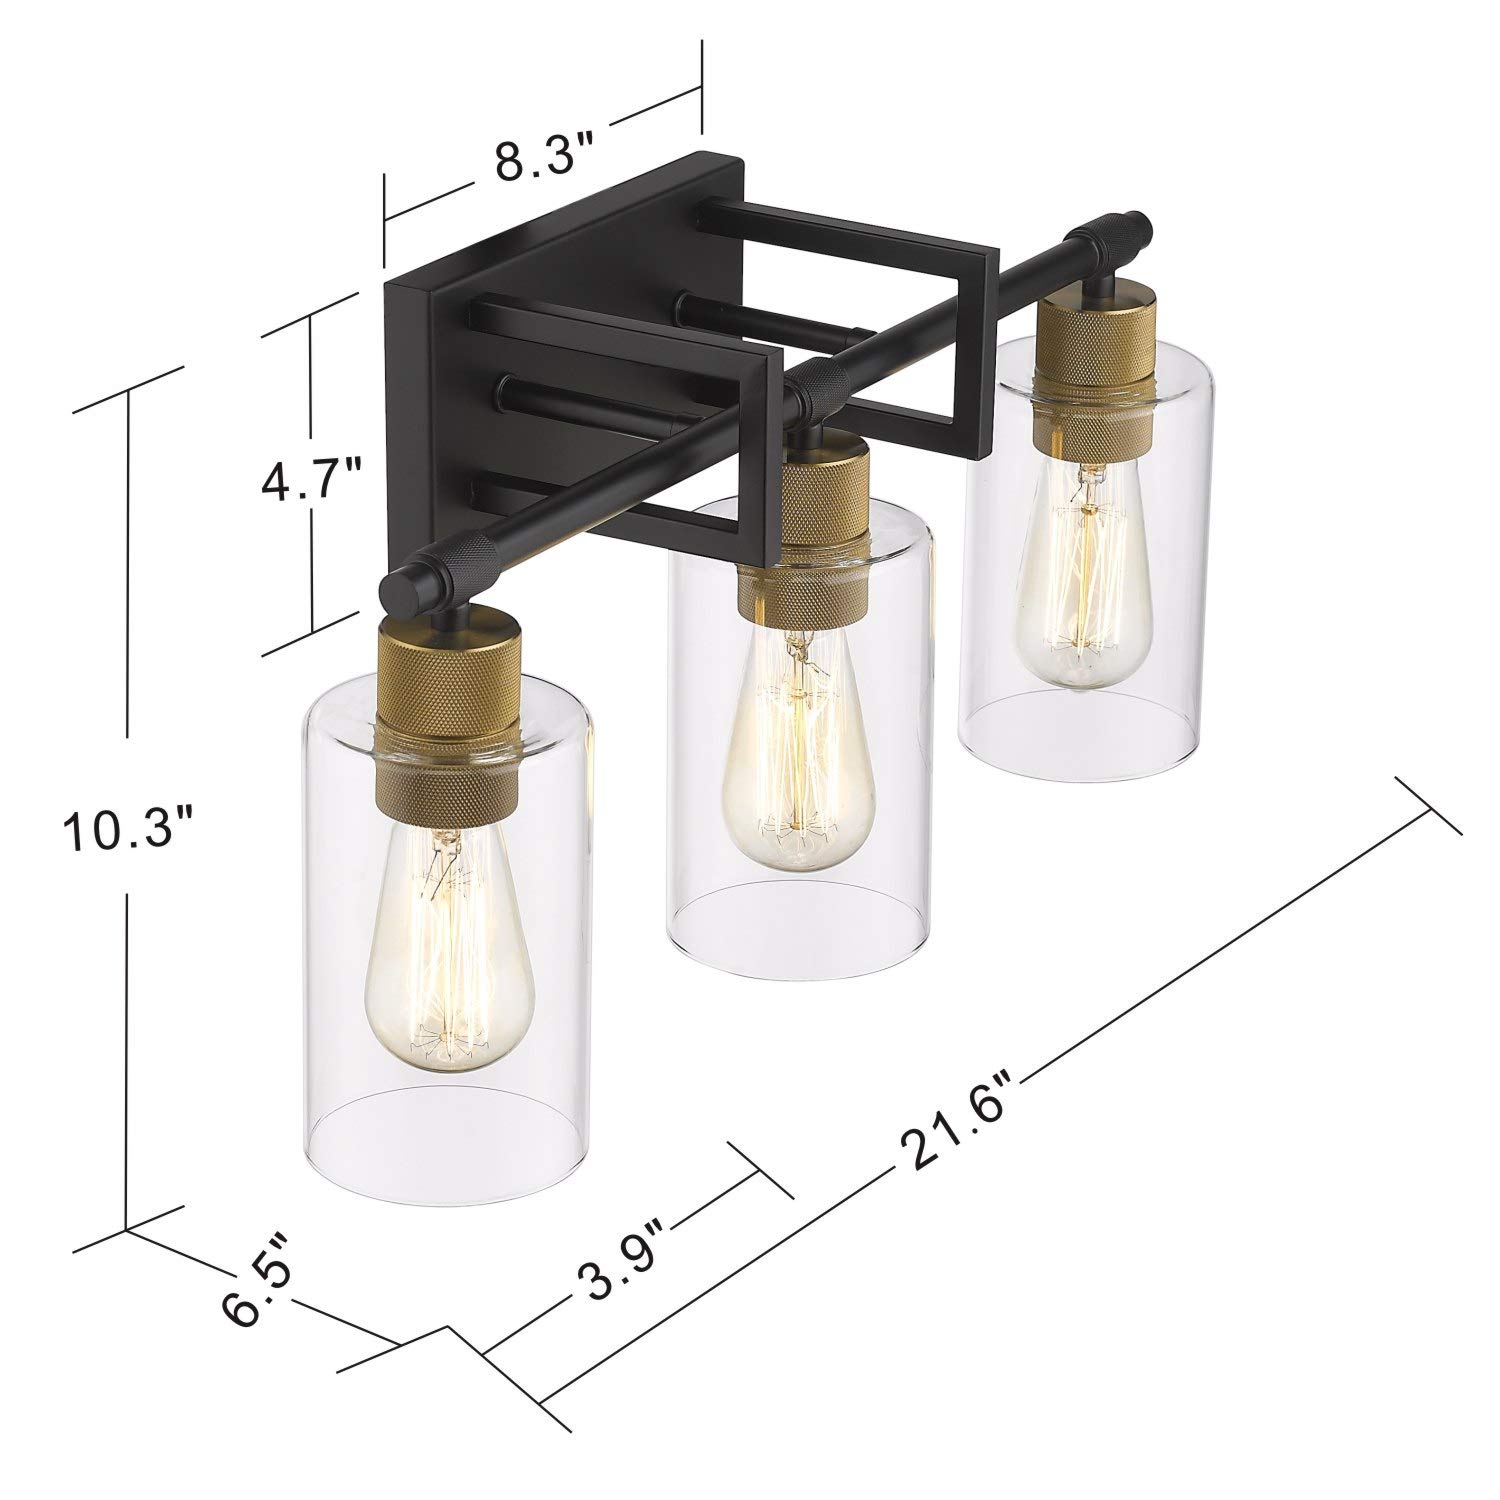 zeyu 3-Light Vanity Wall Light, Vintage Vanity Light Fixture for Bathroom Kitchen 22 Inch, Black and Antique Gold Finish with Clear Glass Shade, 1102-3 BK+AG